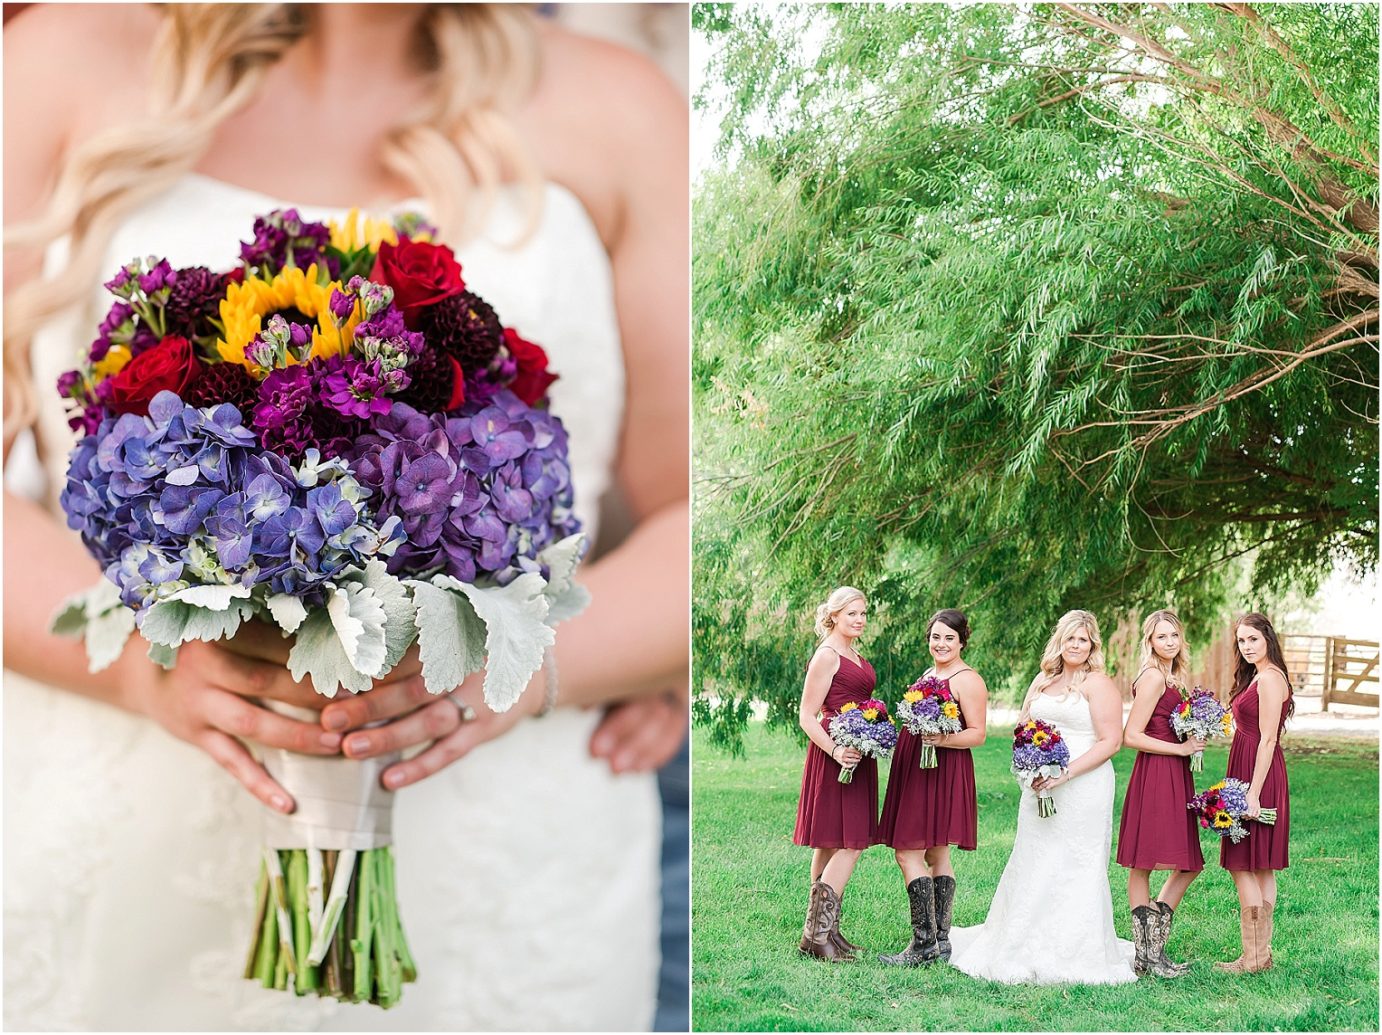 Favorite wedding flowers of 2017 For brides multi-colored wedding flowers